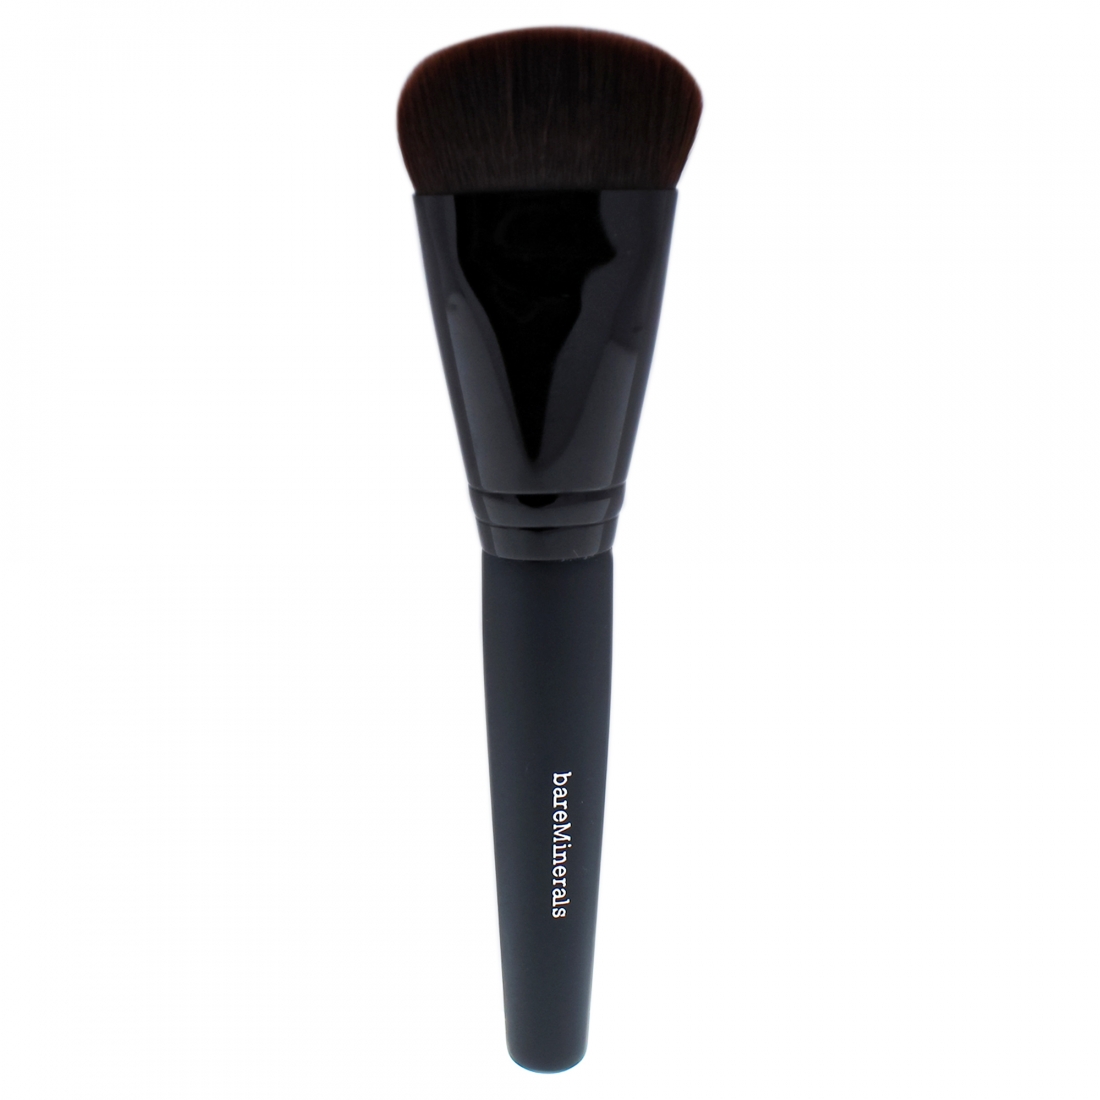 'Luxe Performance' Foundation Brush